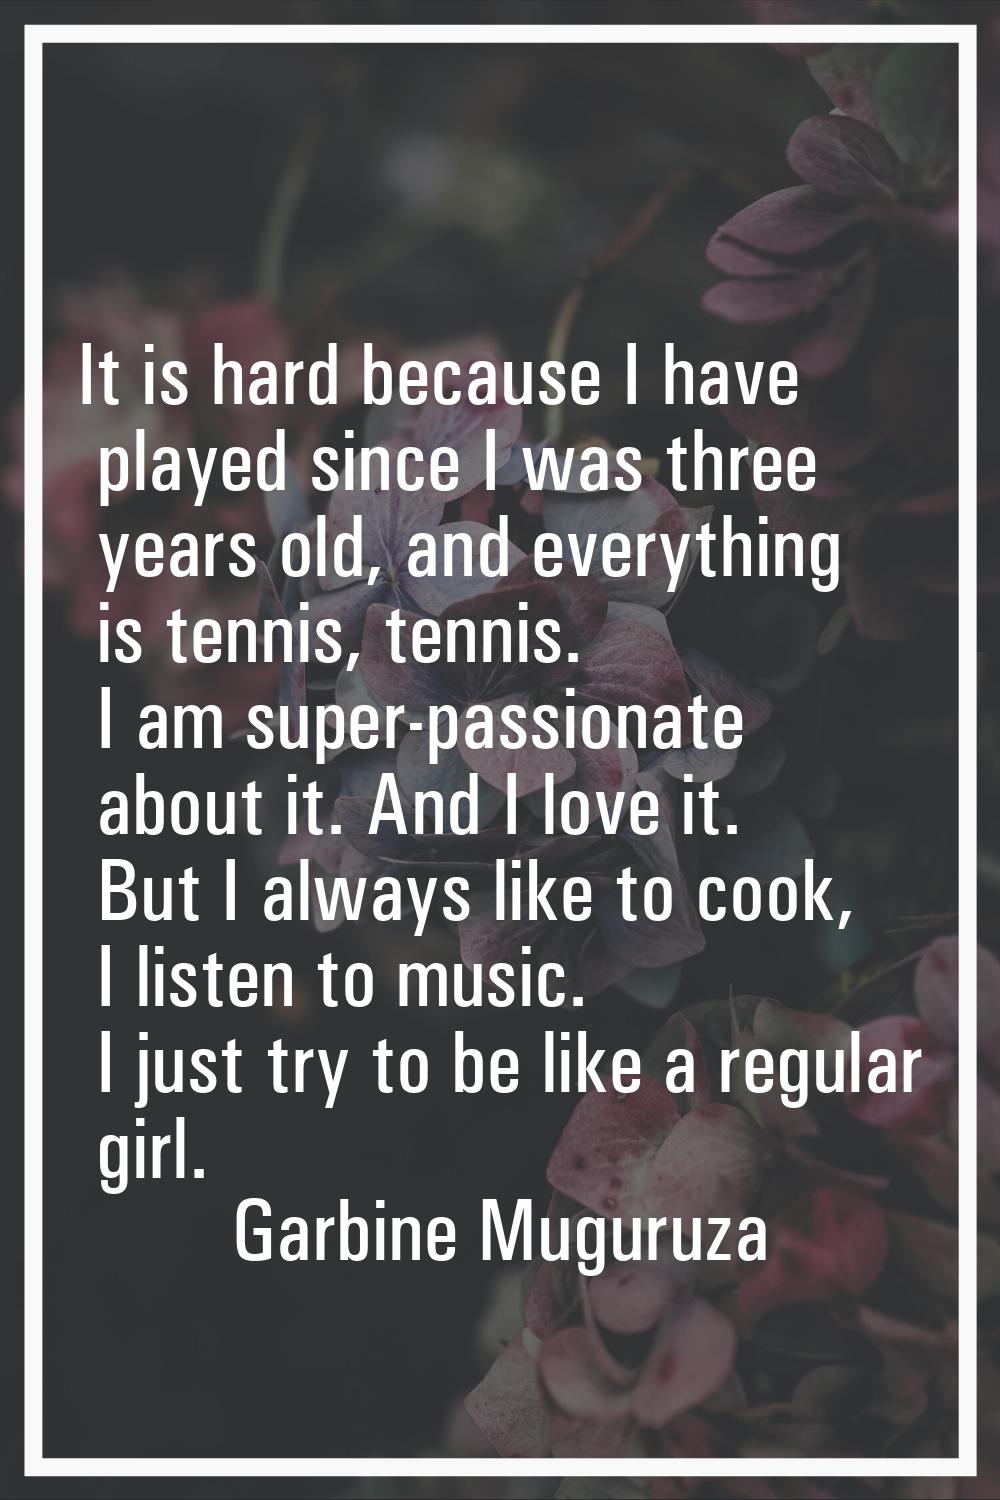 It is hard because I have played since I was three years old, and everything is tennis, tennis. I a